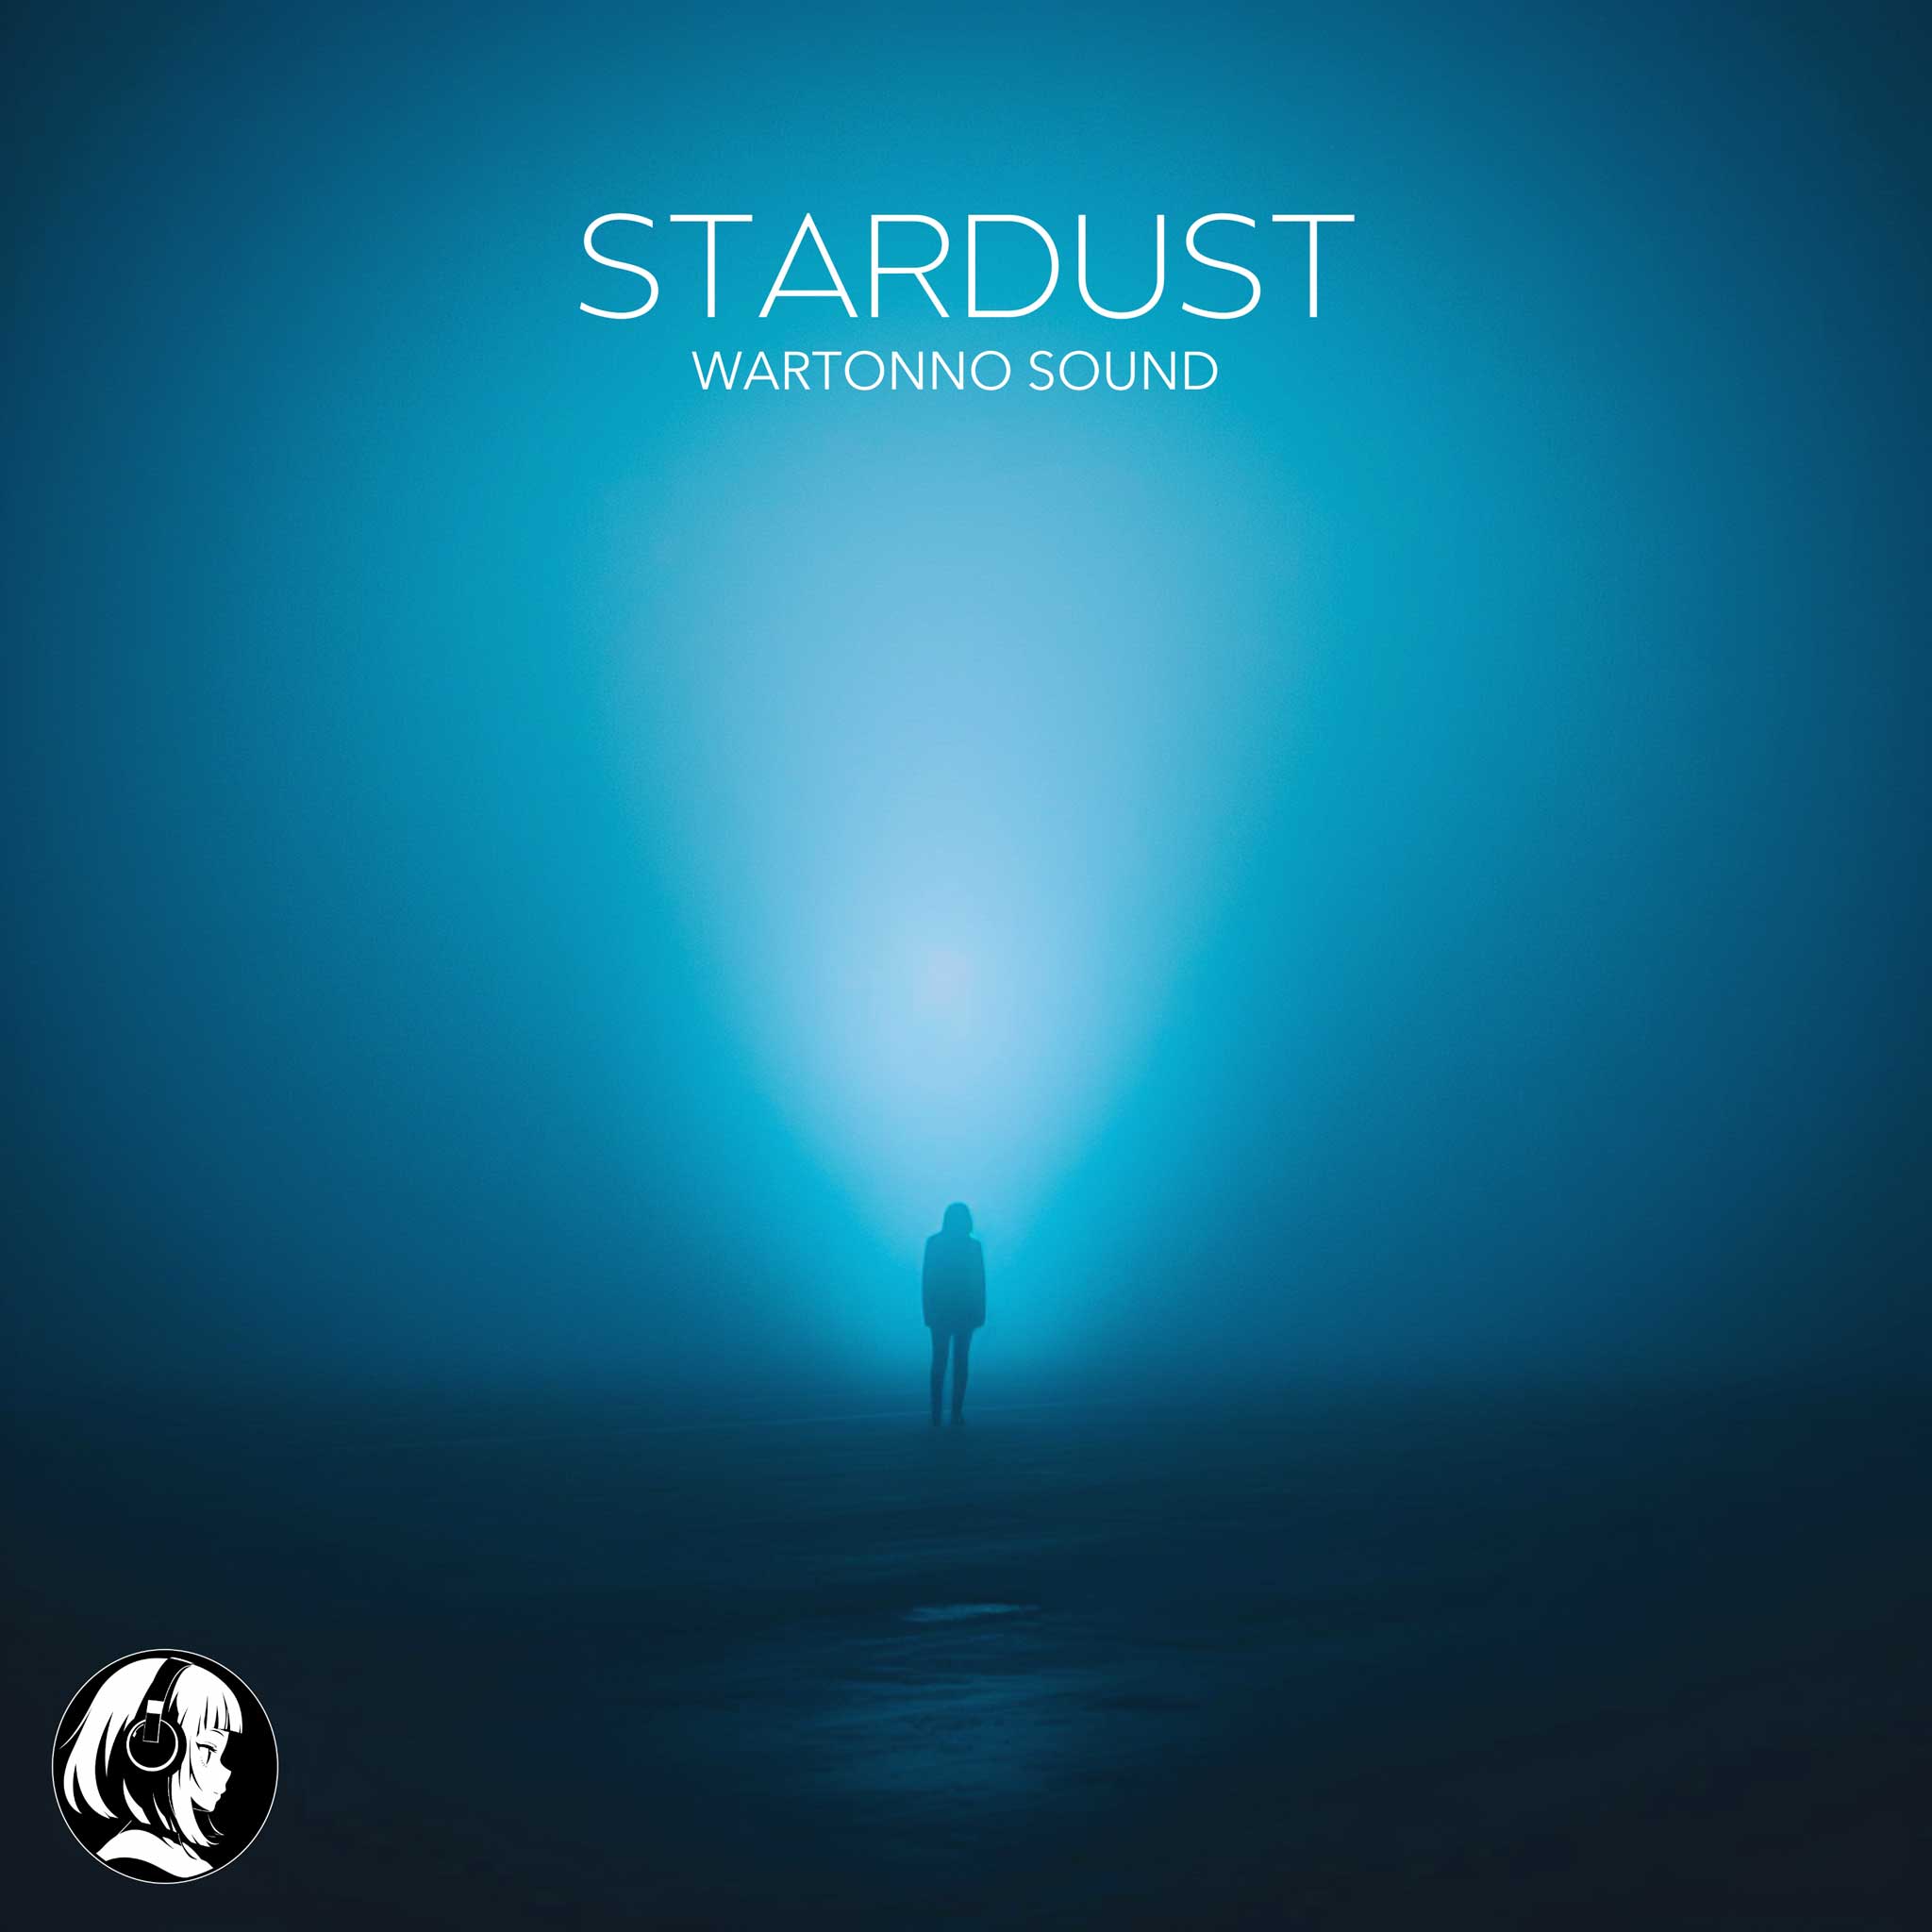 Stardust CD Cover by Wartonno Sound